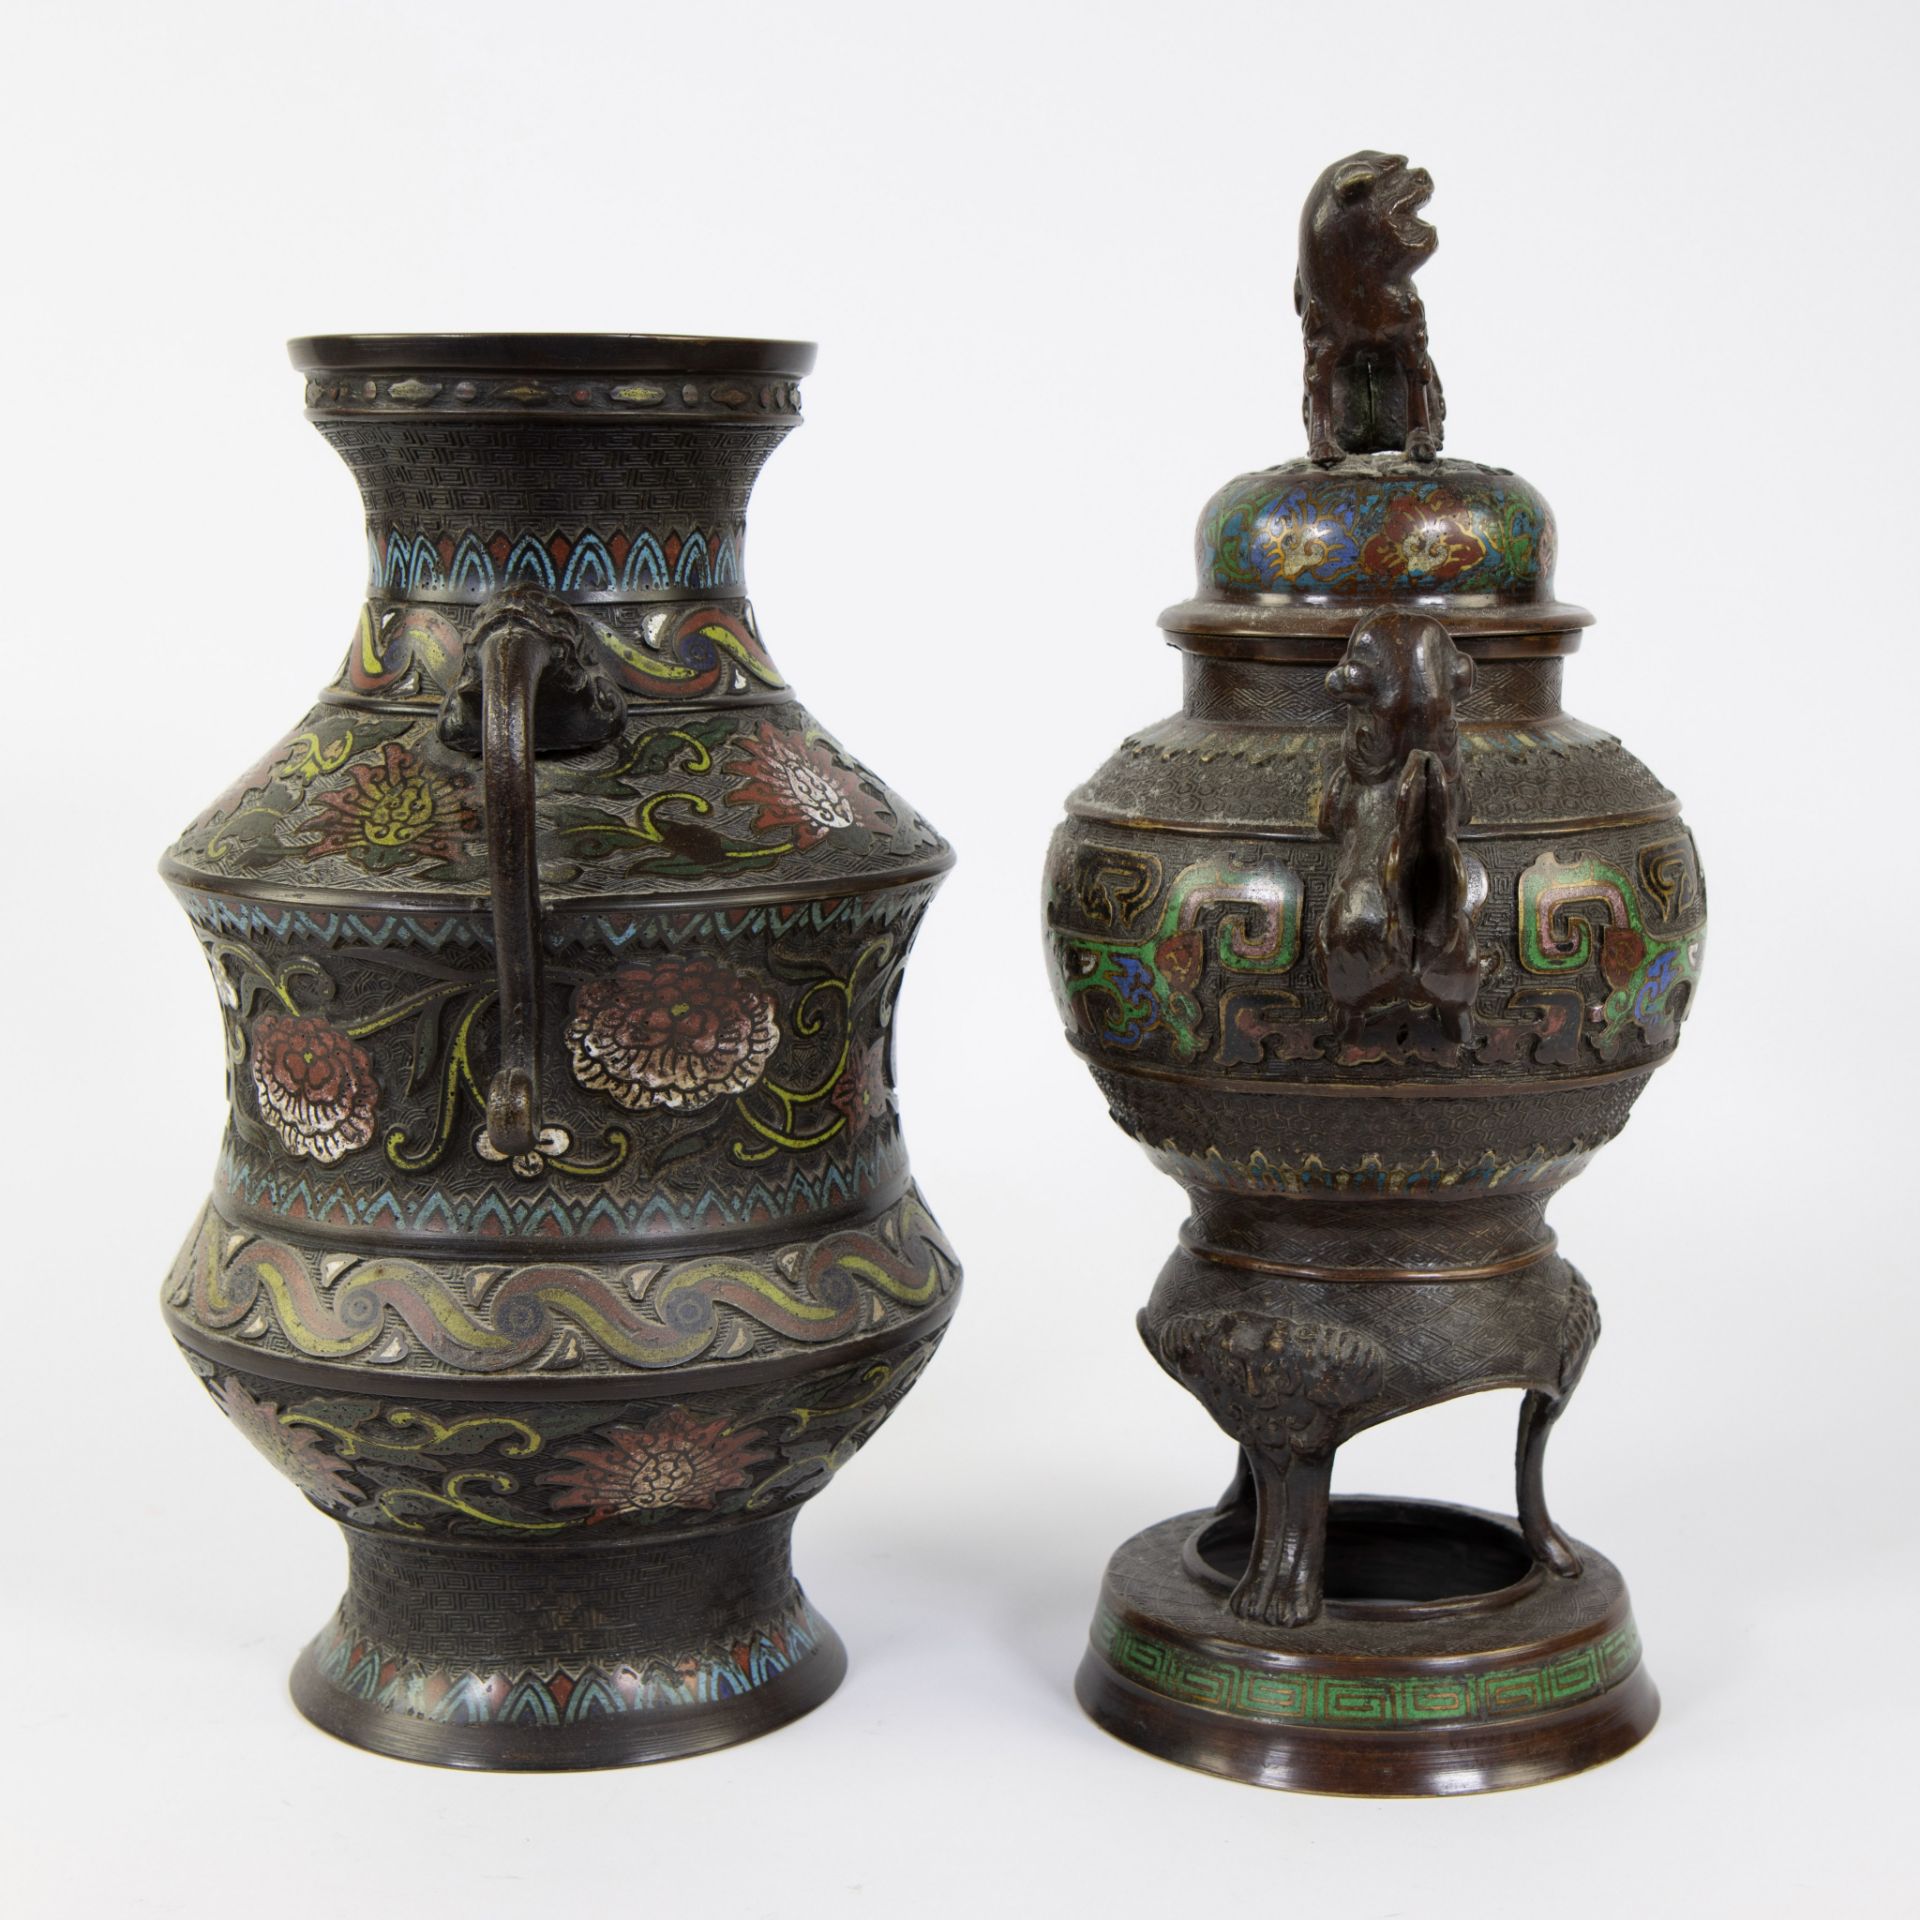 Japanese champlevé vase and incense burner, 19th century - Image 4 of 5